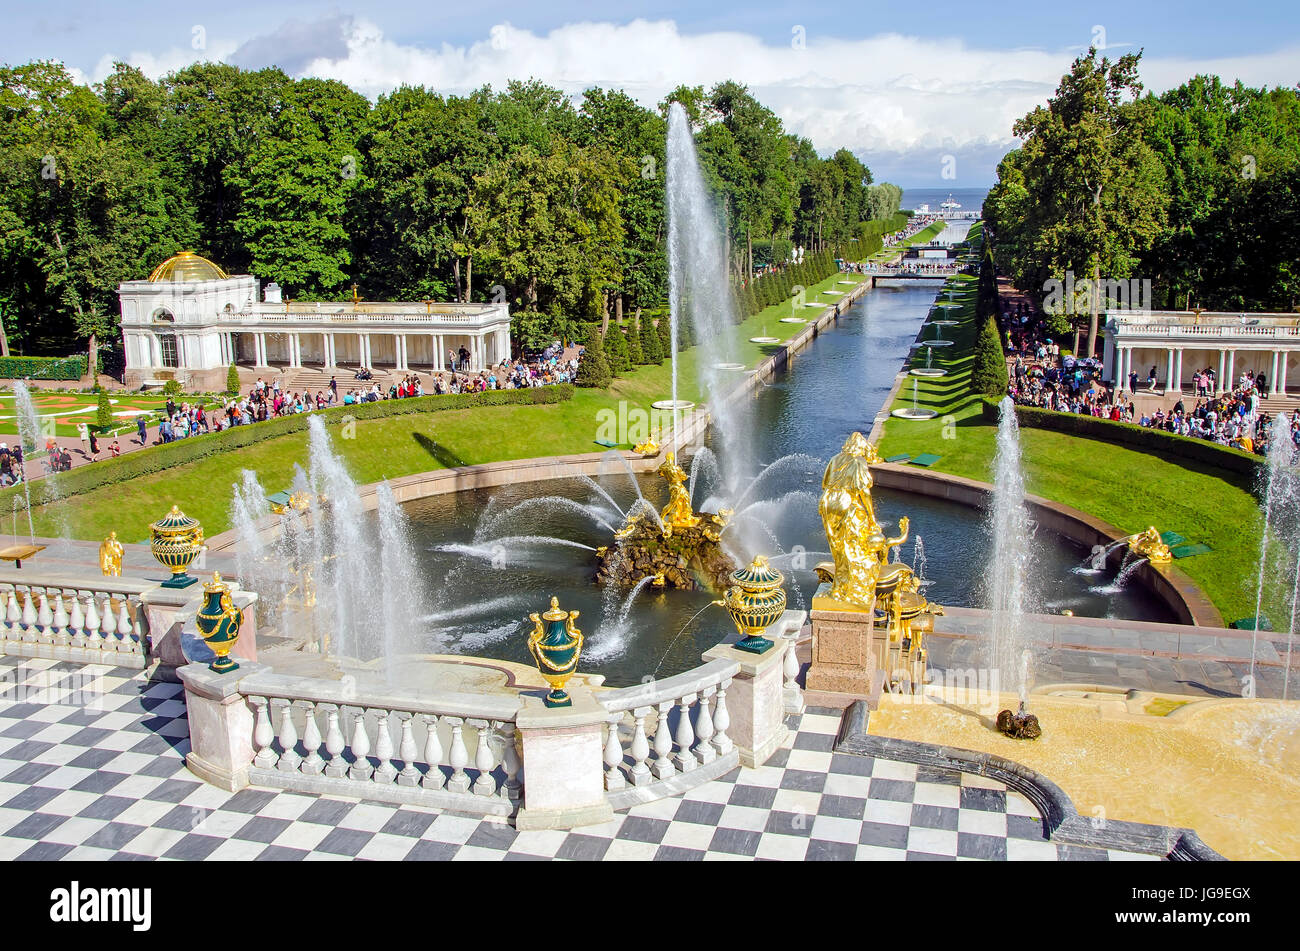 Peterhof Palace Grand Cascade with fountains and gardens in summer located near Saint Petersburg, Russia Stock Photo